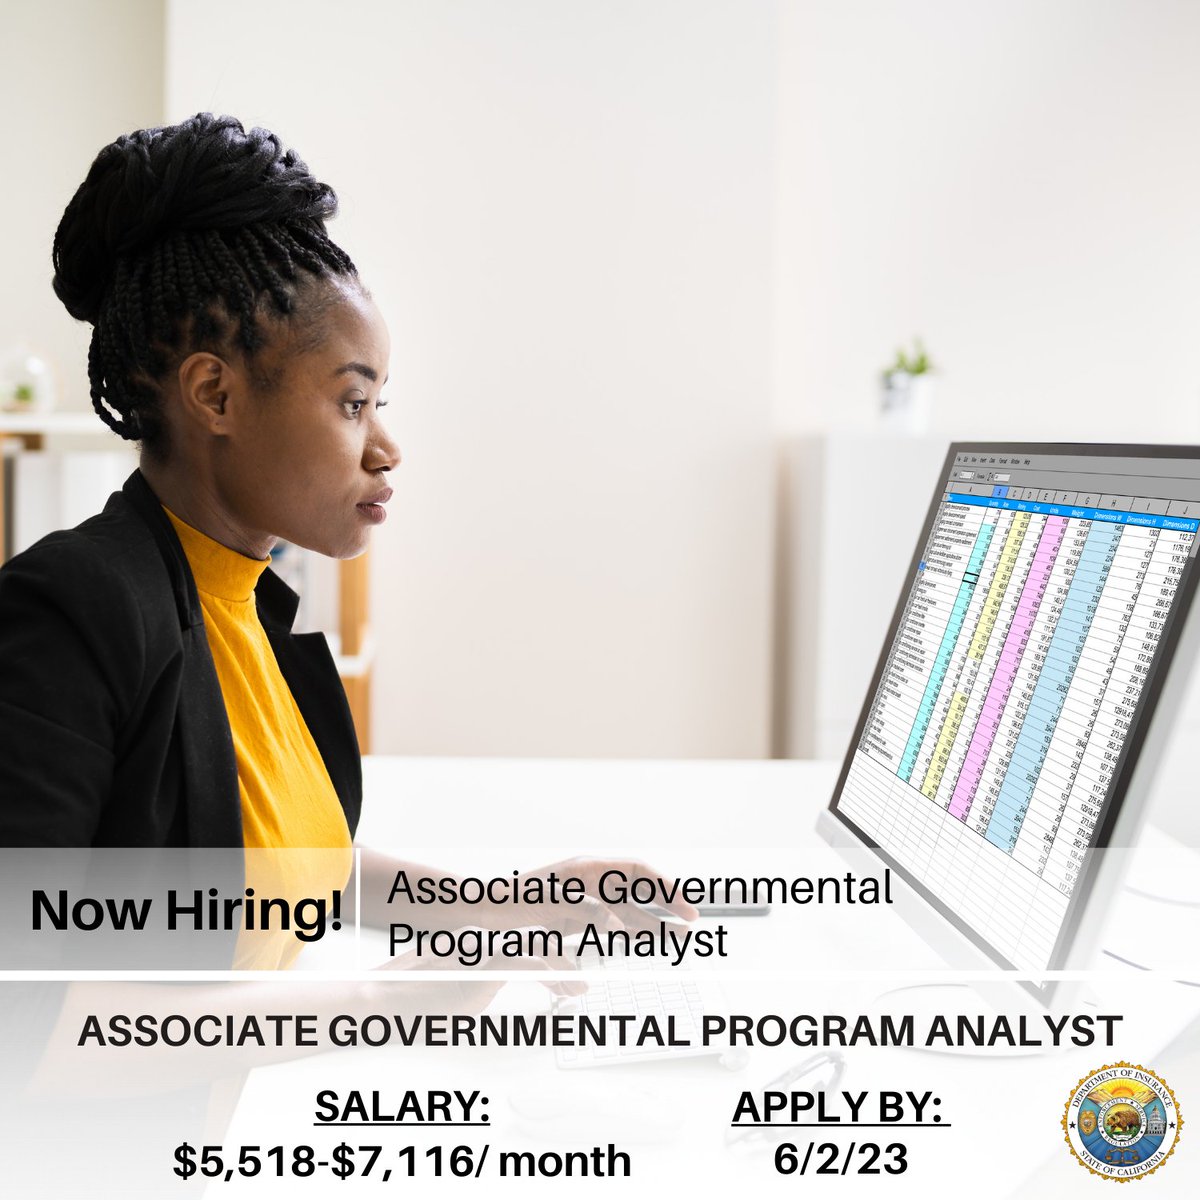 CDI is seeking an Associate Governmental Program Analyst to join our team!

Click to apply: calcareers.ca.gov/CalHrPublic/Jo…

#work4ca #statejobs